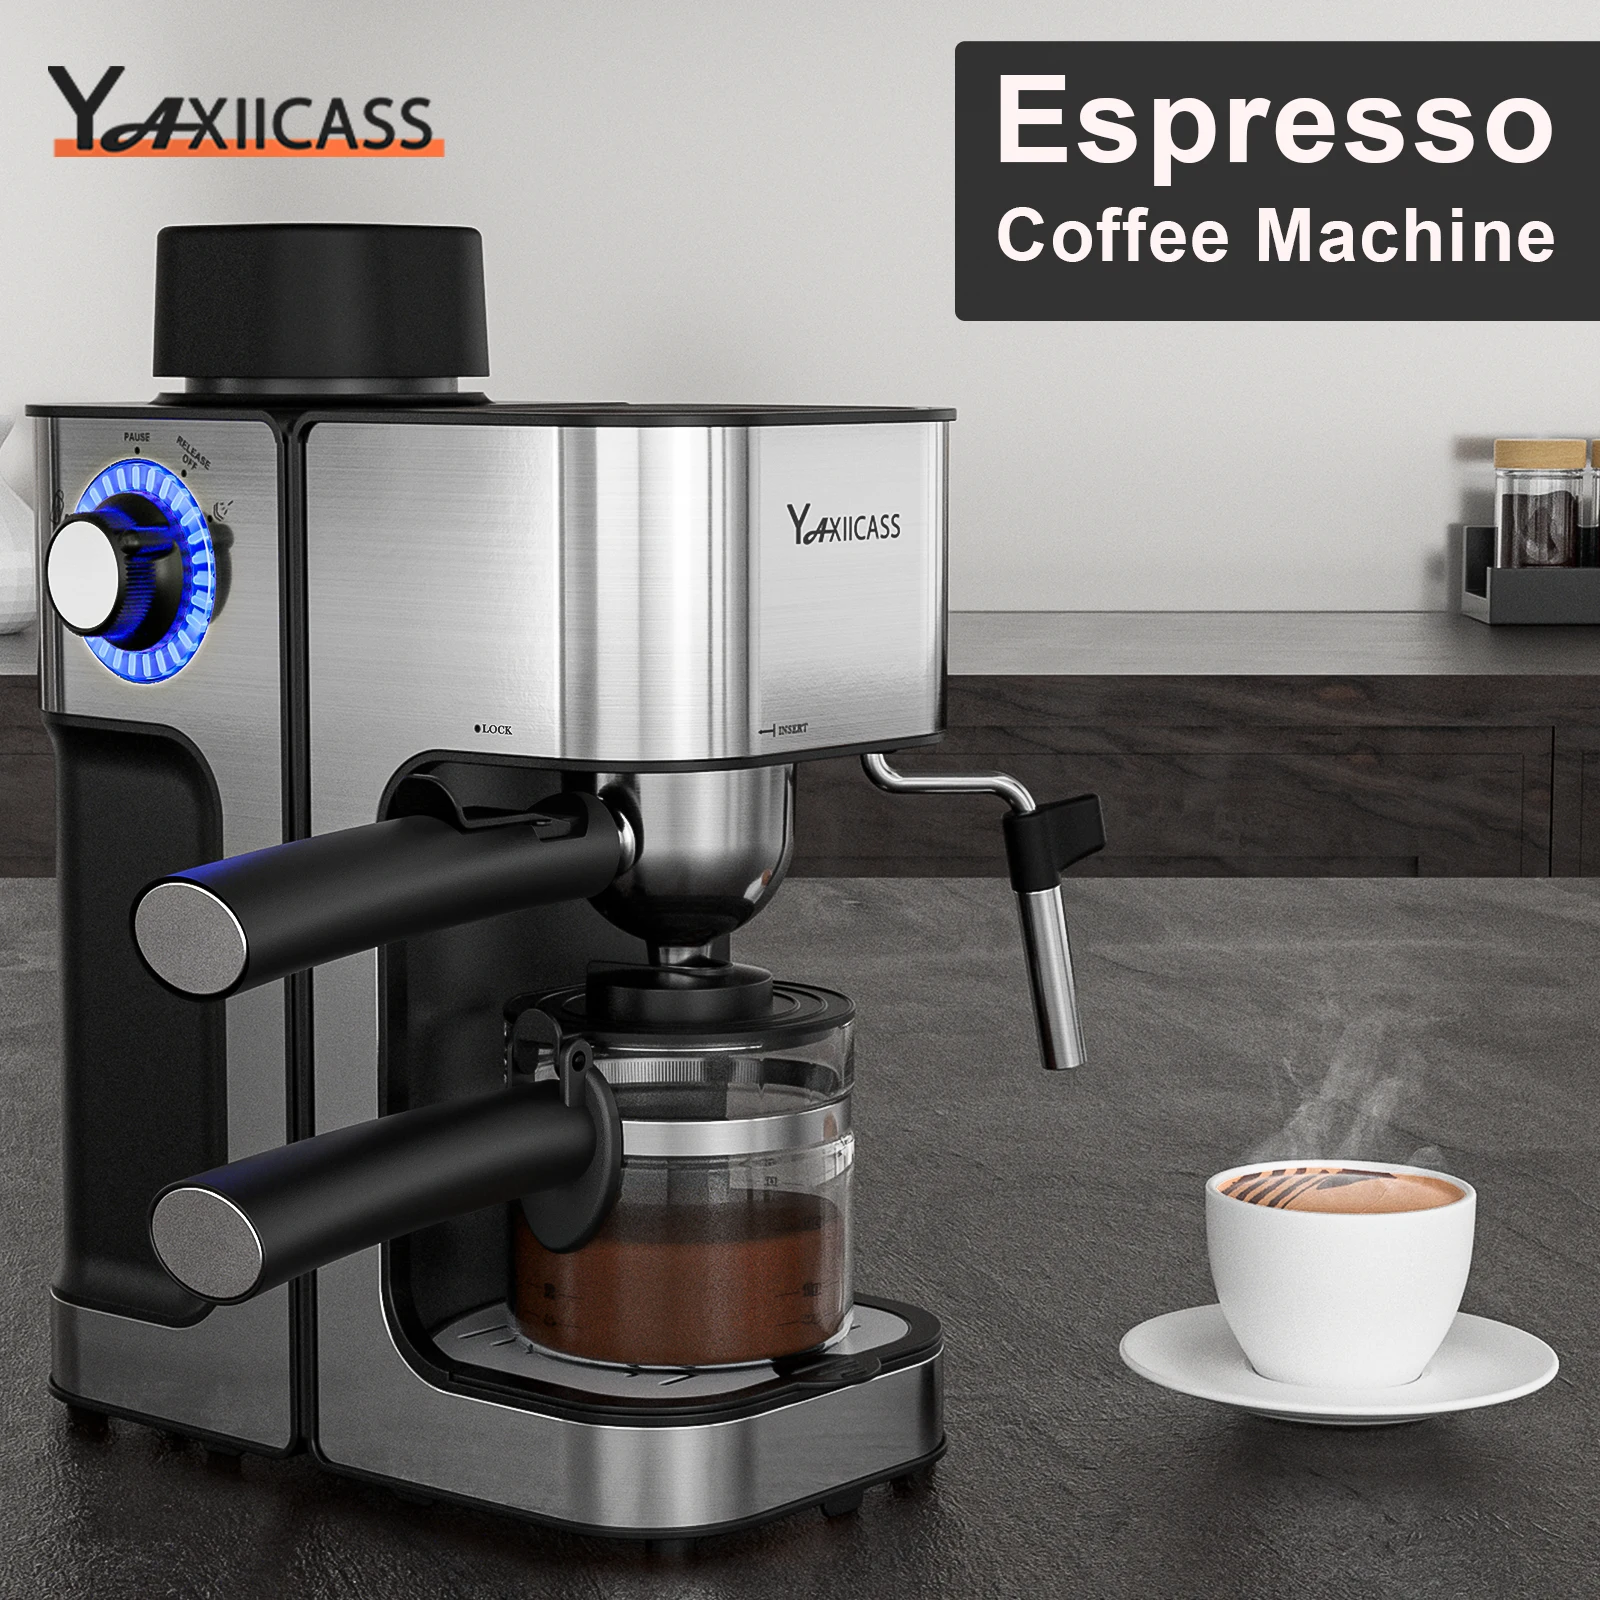 YAXIICASS Coffee Machine 5 Portland Mall Surprise price Bar 2 Maker 1 Espresso in With